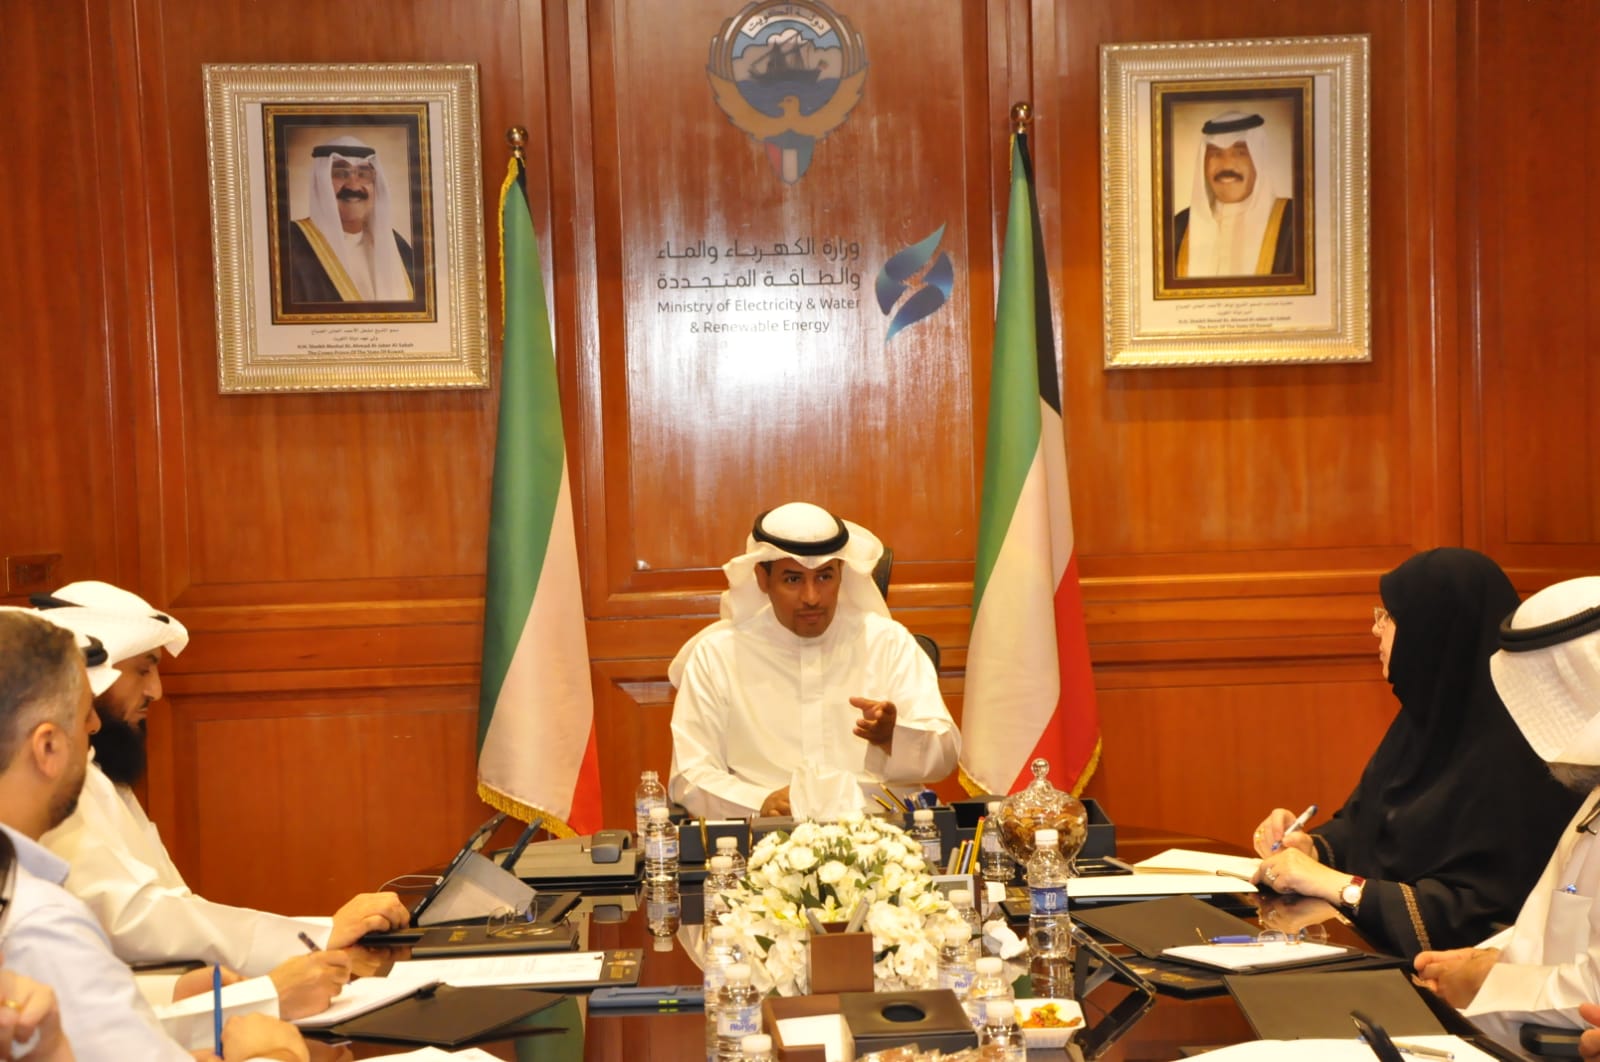 Minister of Electricity, Water, and Renewable Energy Mutlaq Burguba in the meeting